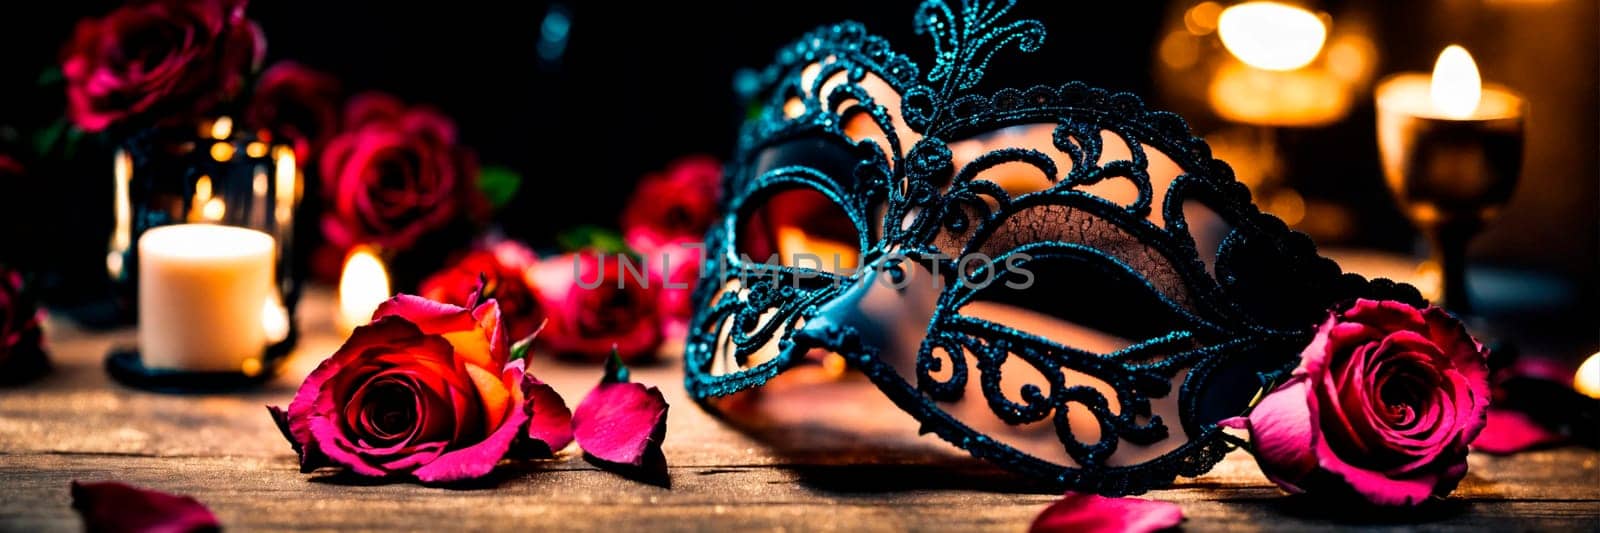 Black lace mask for masquerade. Selective focus. holiday.